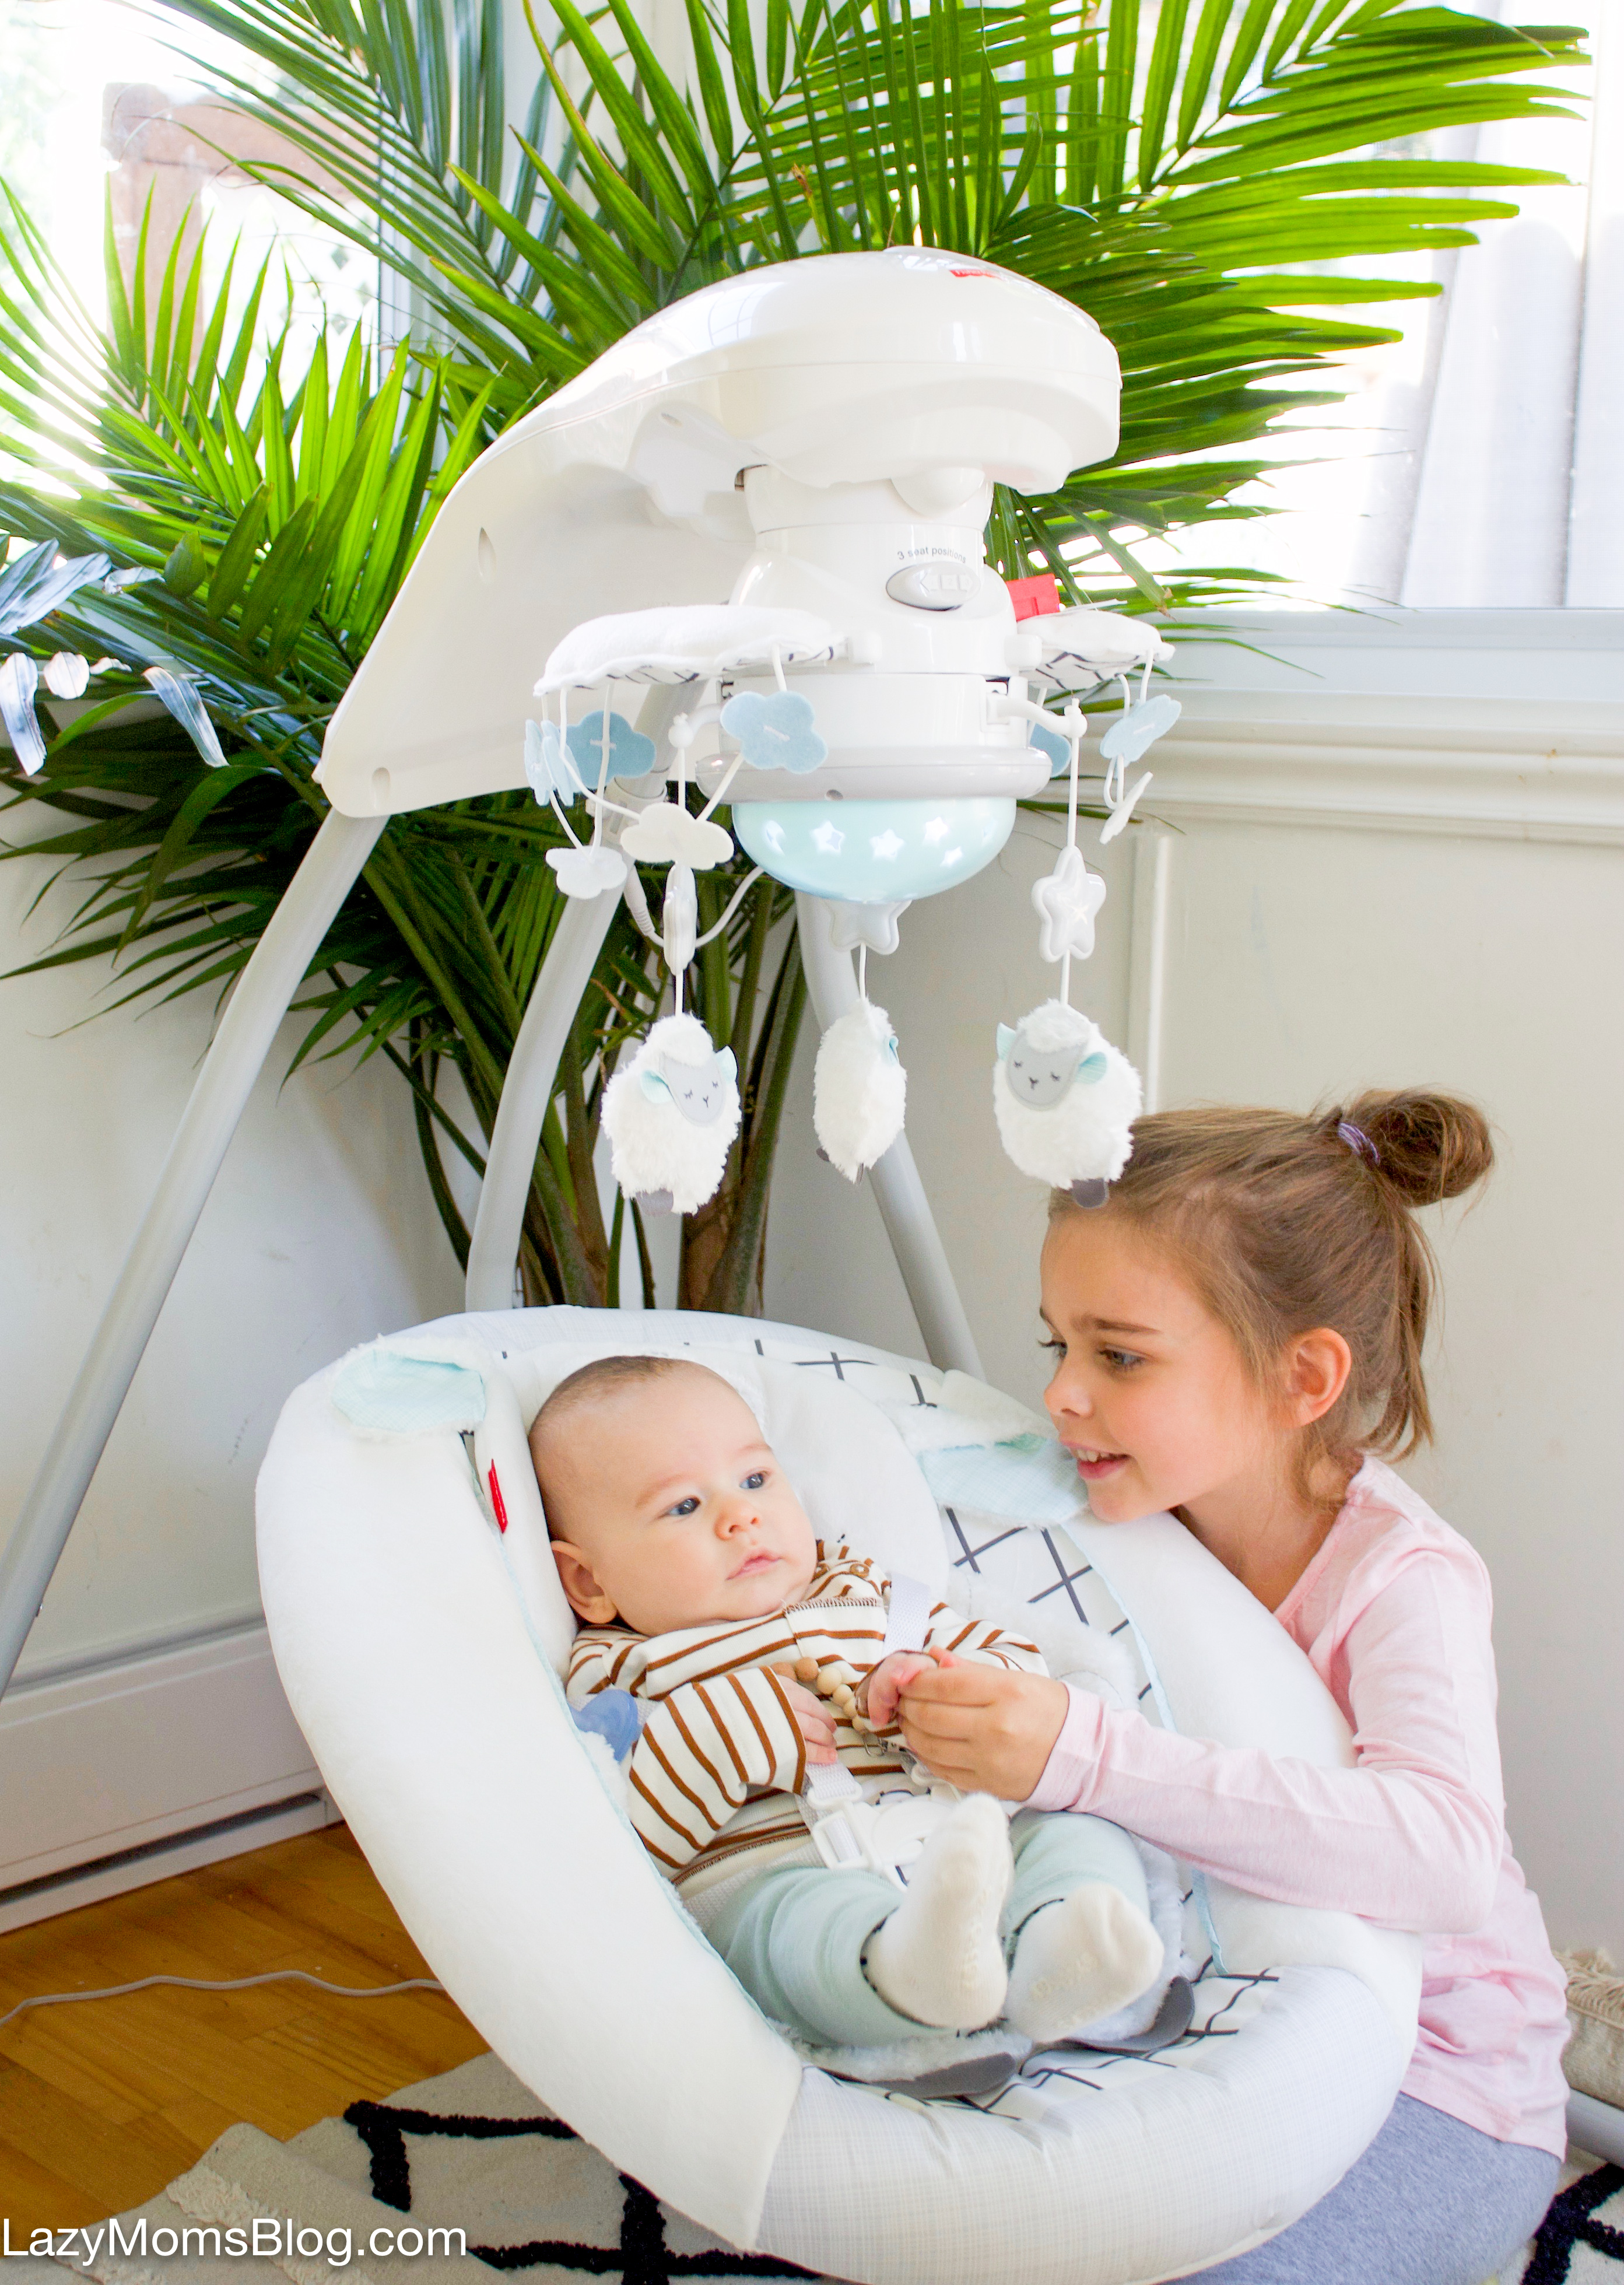 I got this Sweet Little Lamb Cradle n Swing from BABIES R US Canada, and it has completely changed my day routine. I can plan things, I can do things, and I have time to finish them - all while being a stay at home mom. Simply because my baby sleeps and stays asleep!